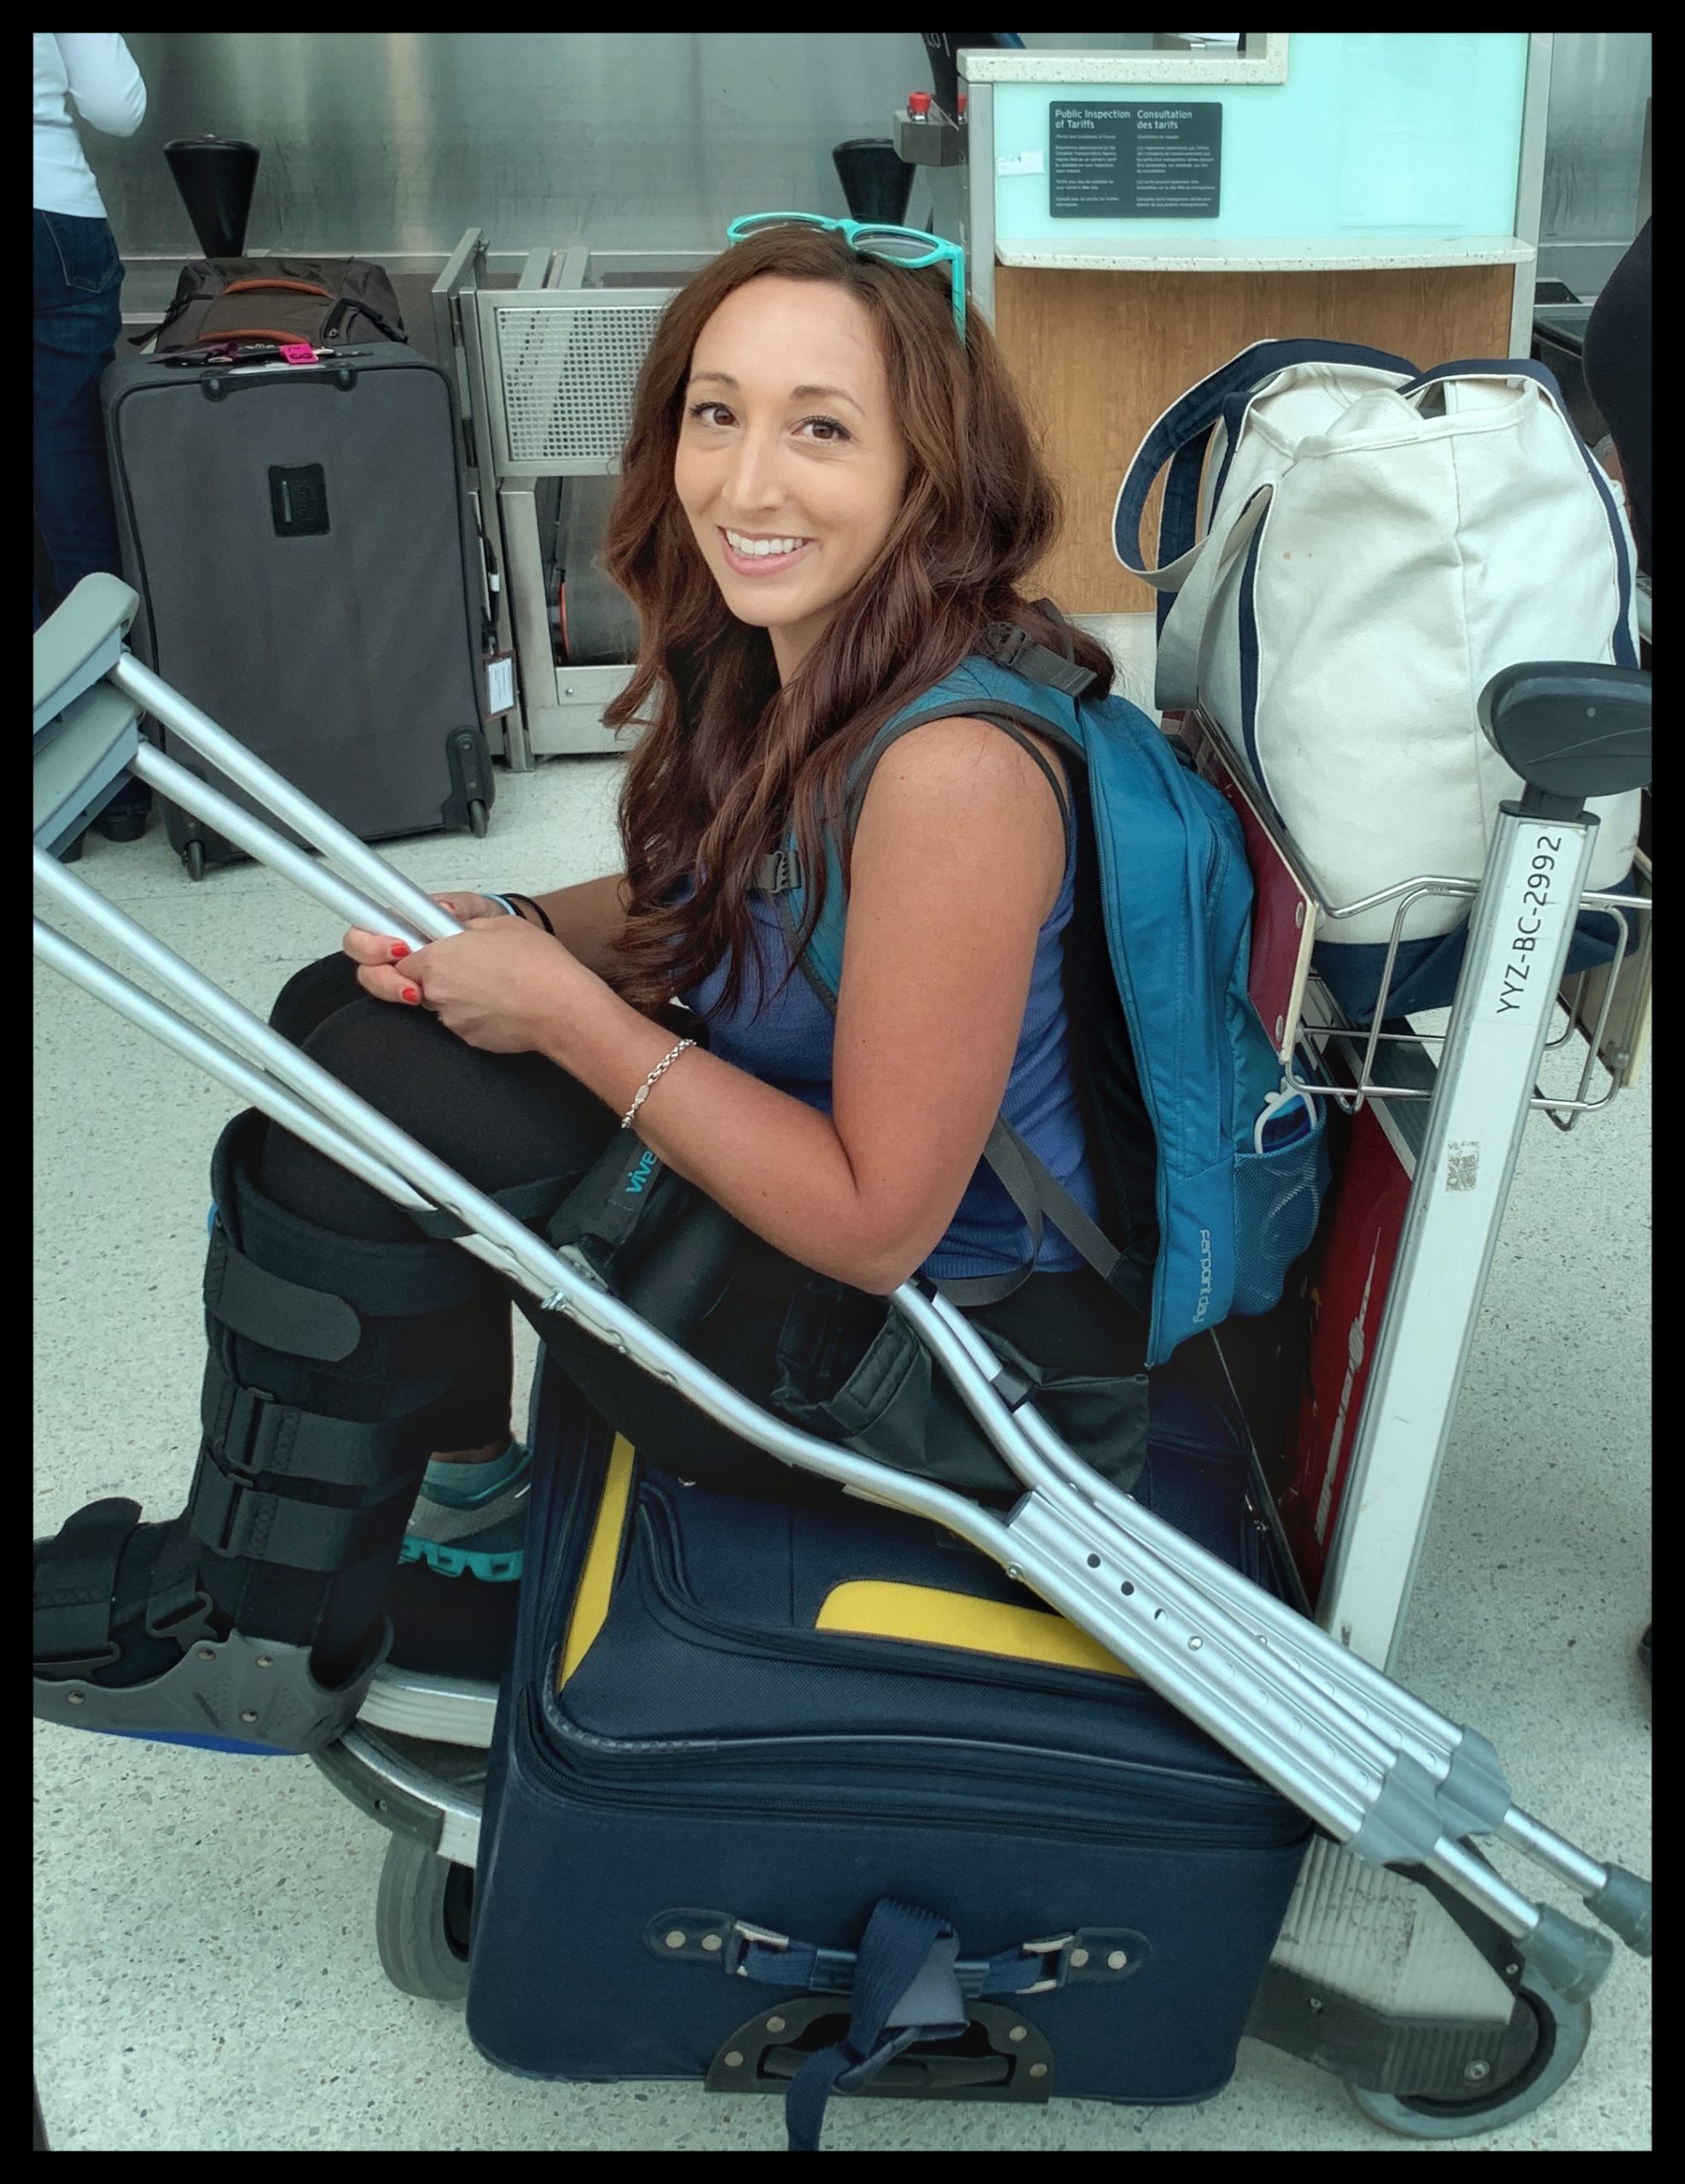 Girl sitting on a suitcase on top of a luggage cart with crutches